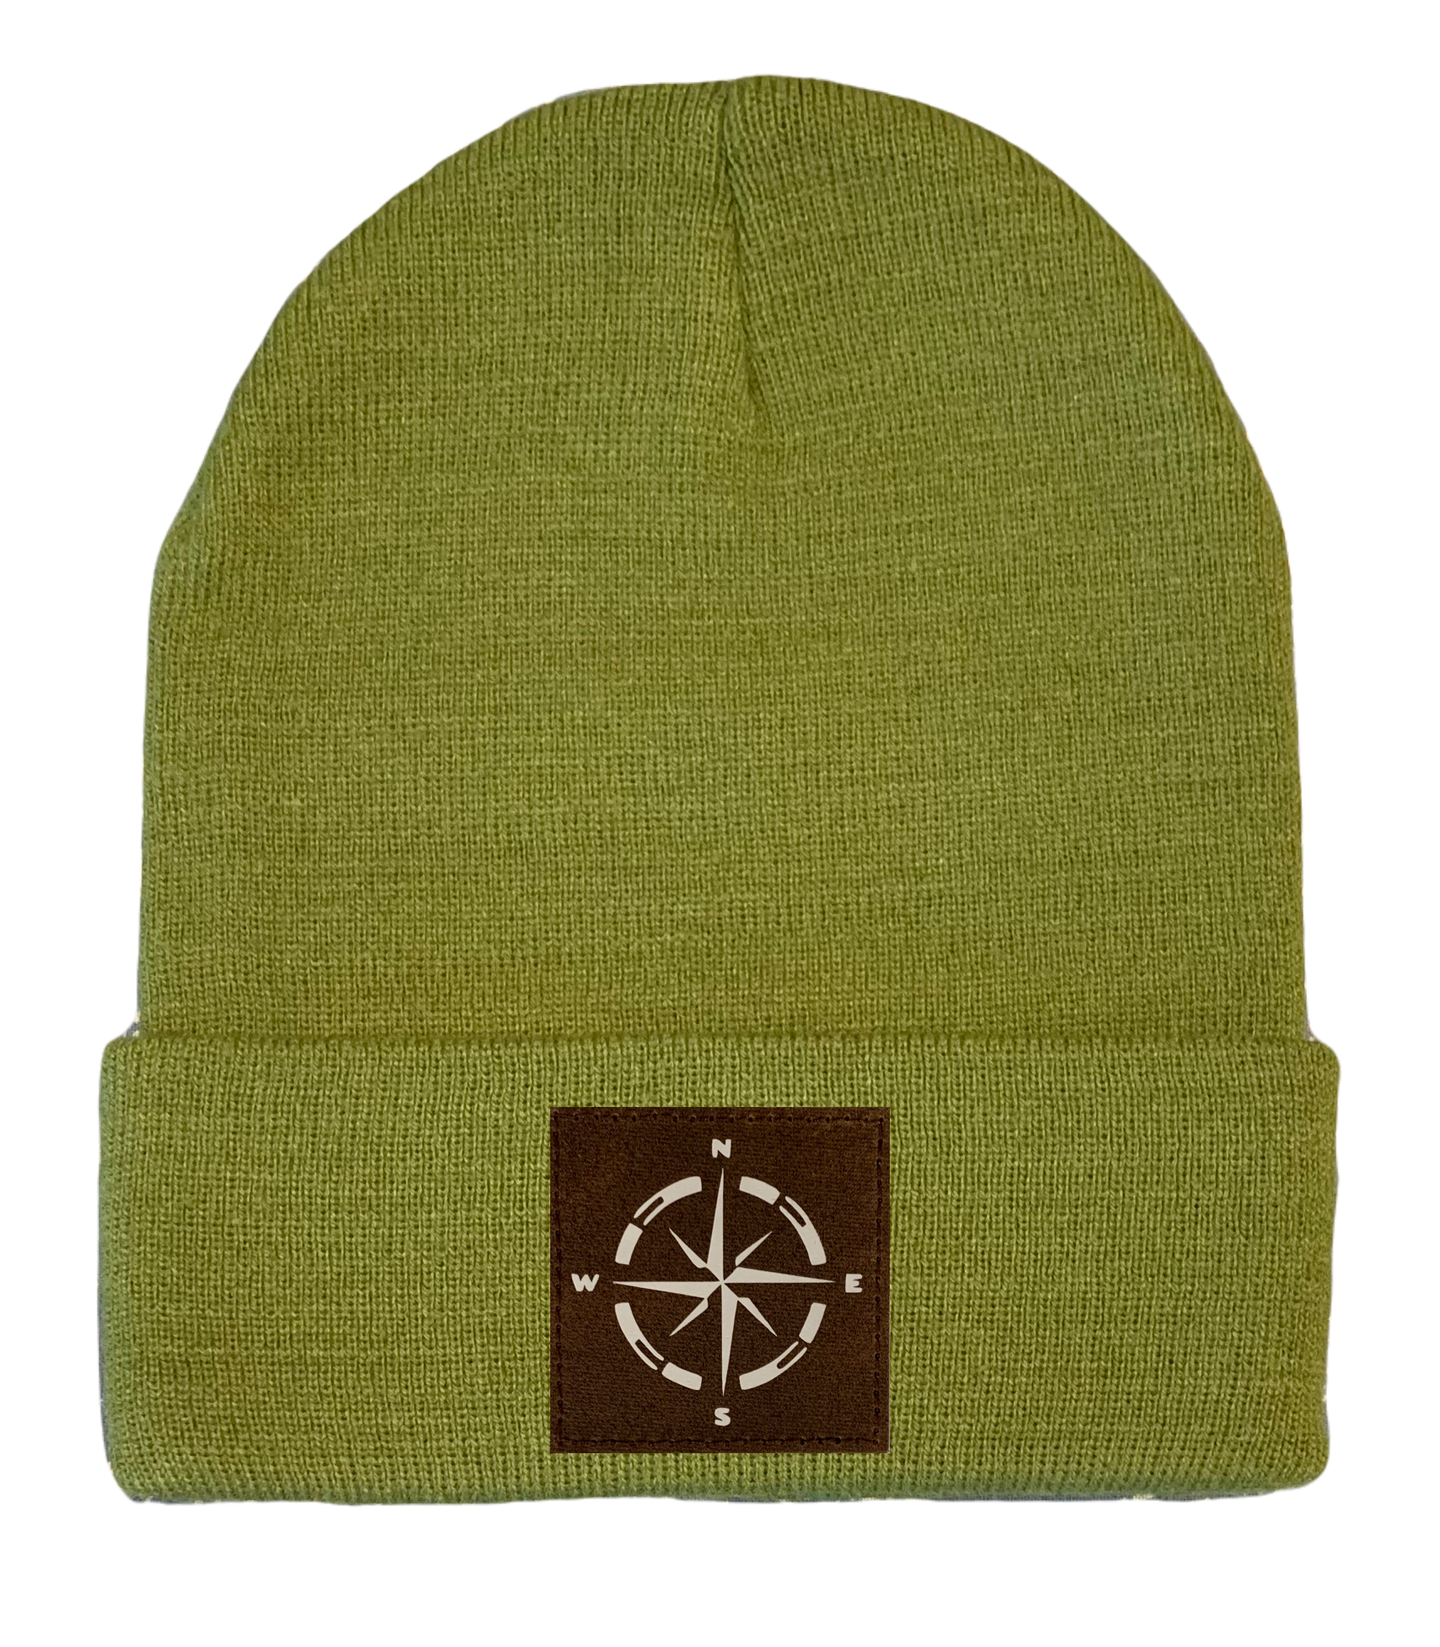 cuffed beanie, knitted hat with hiking camping compass patch by buddha gear